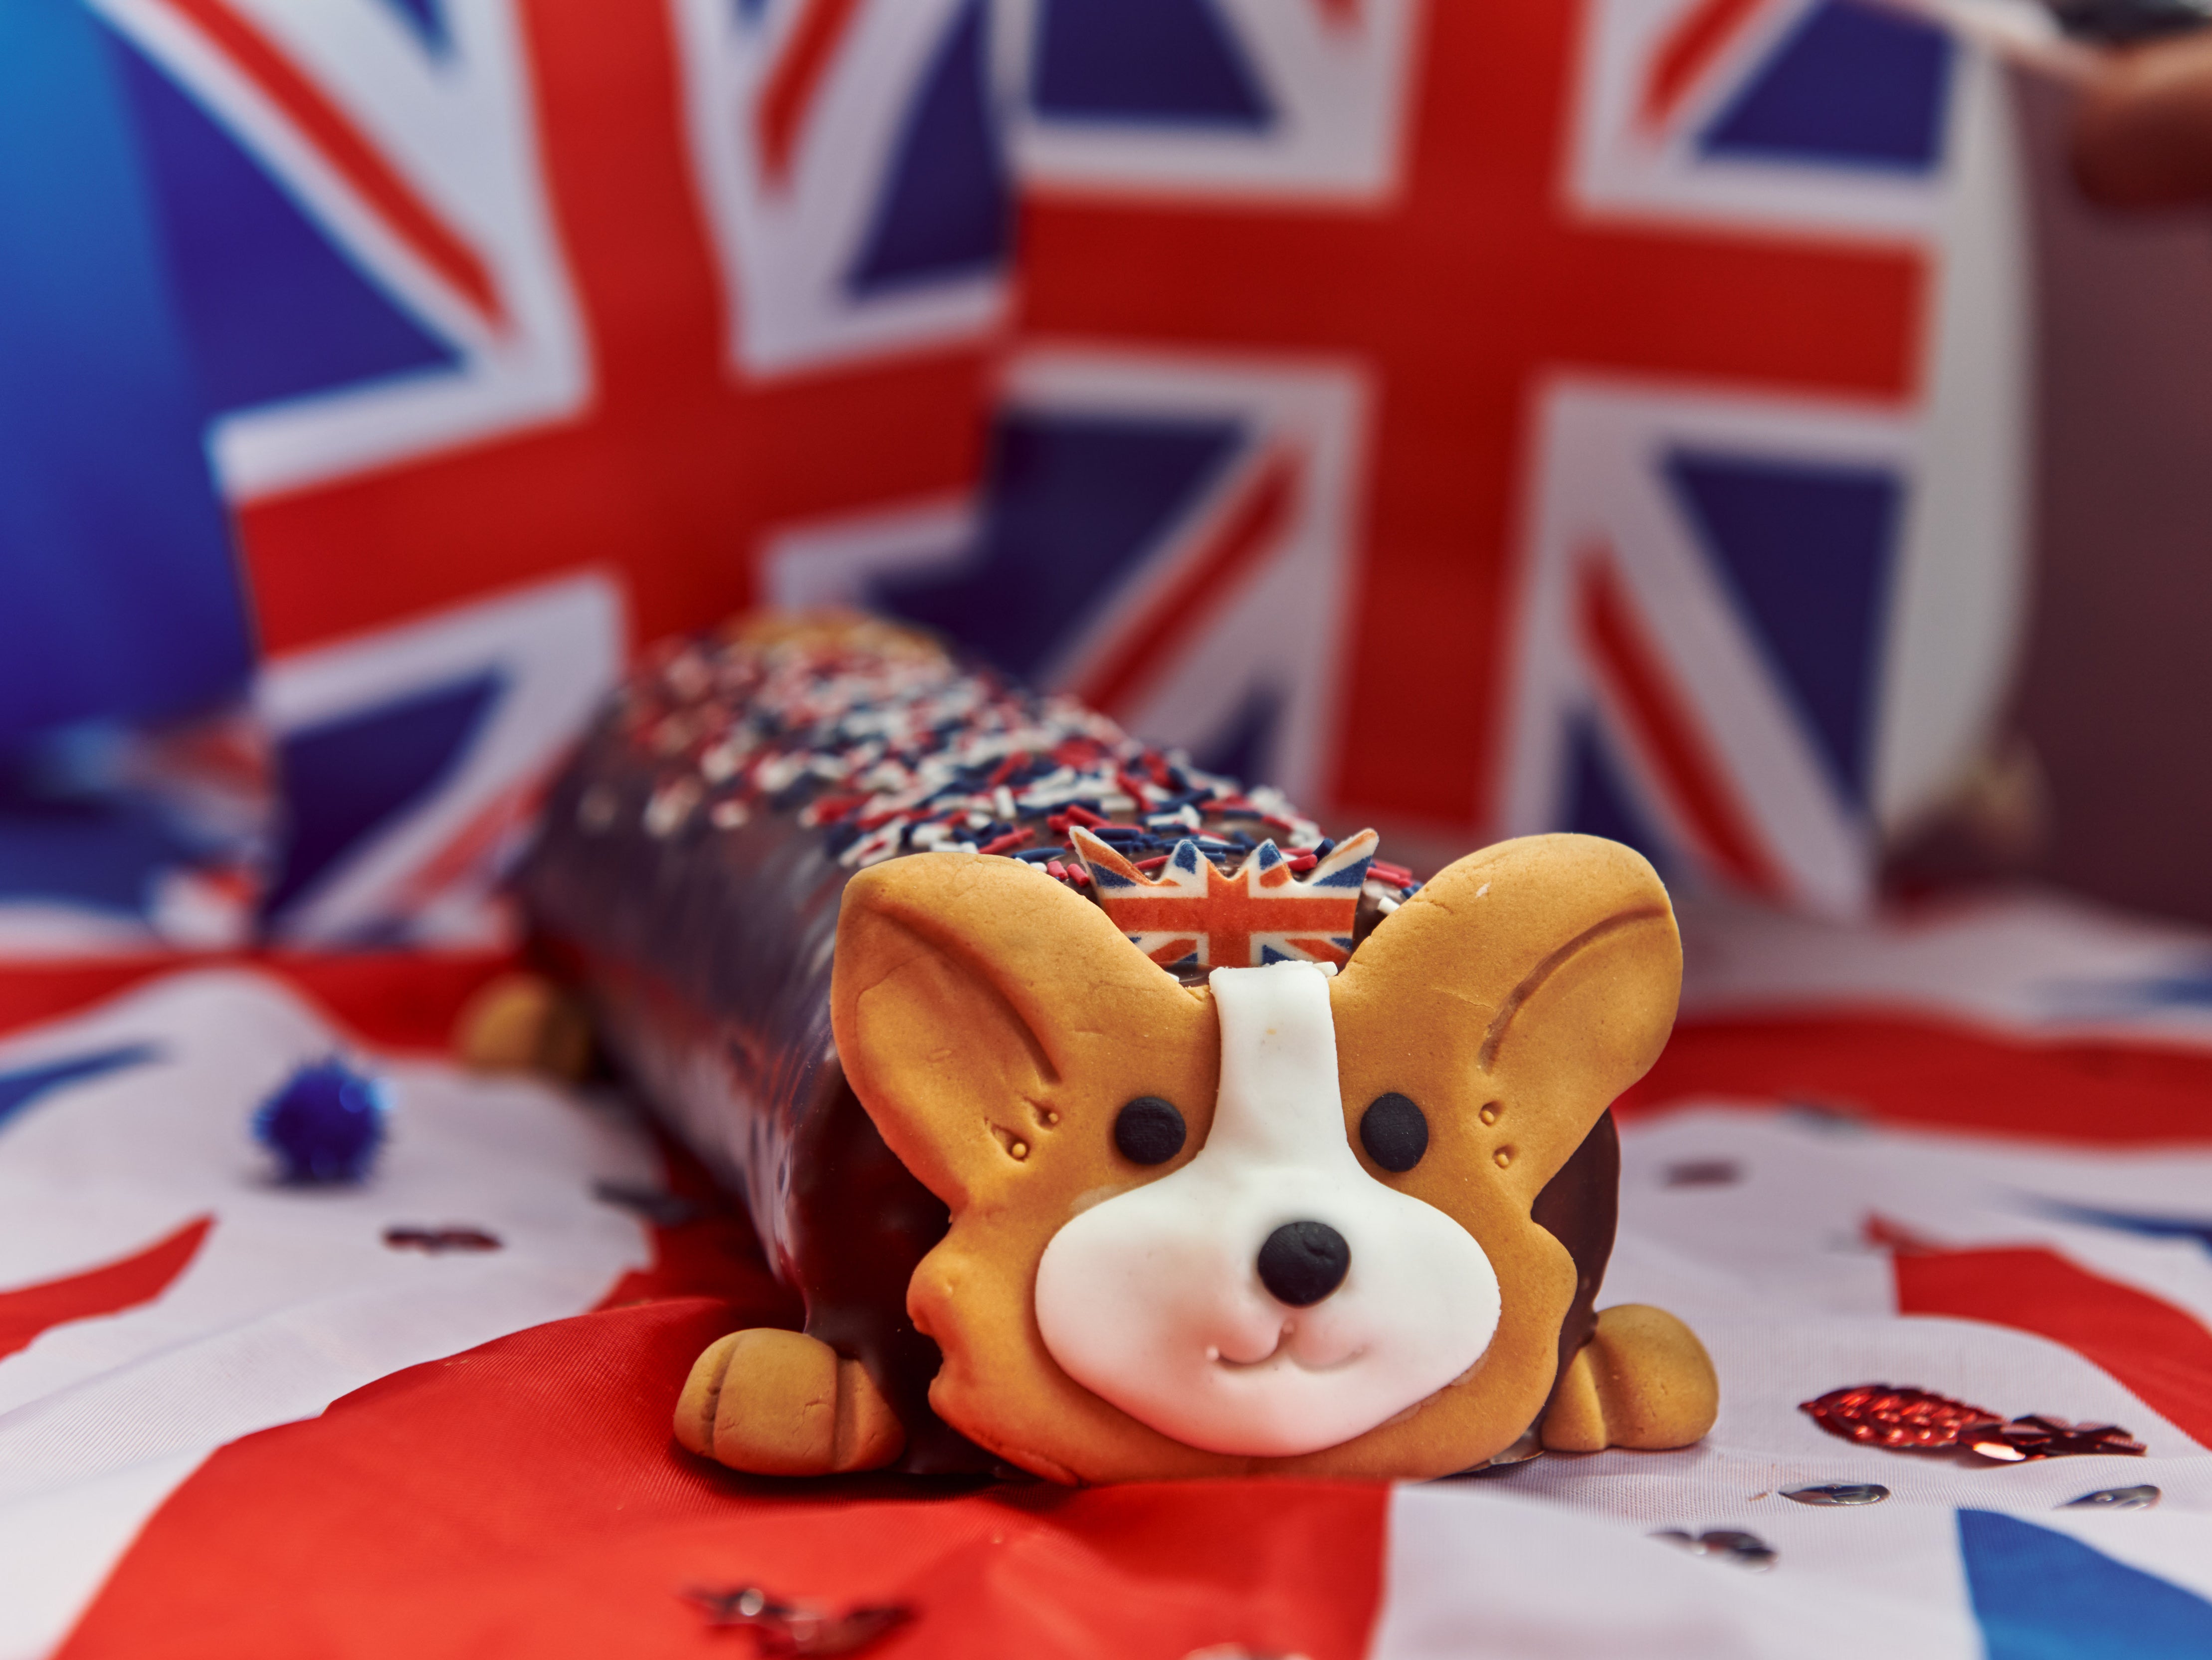 Morrisons’ Corgi Cake launched for the Queen’s Platinum Jubilee